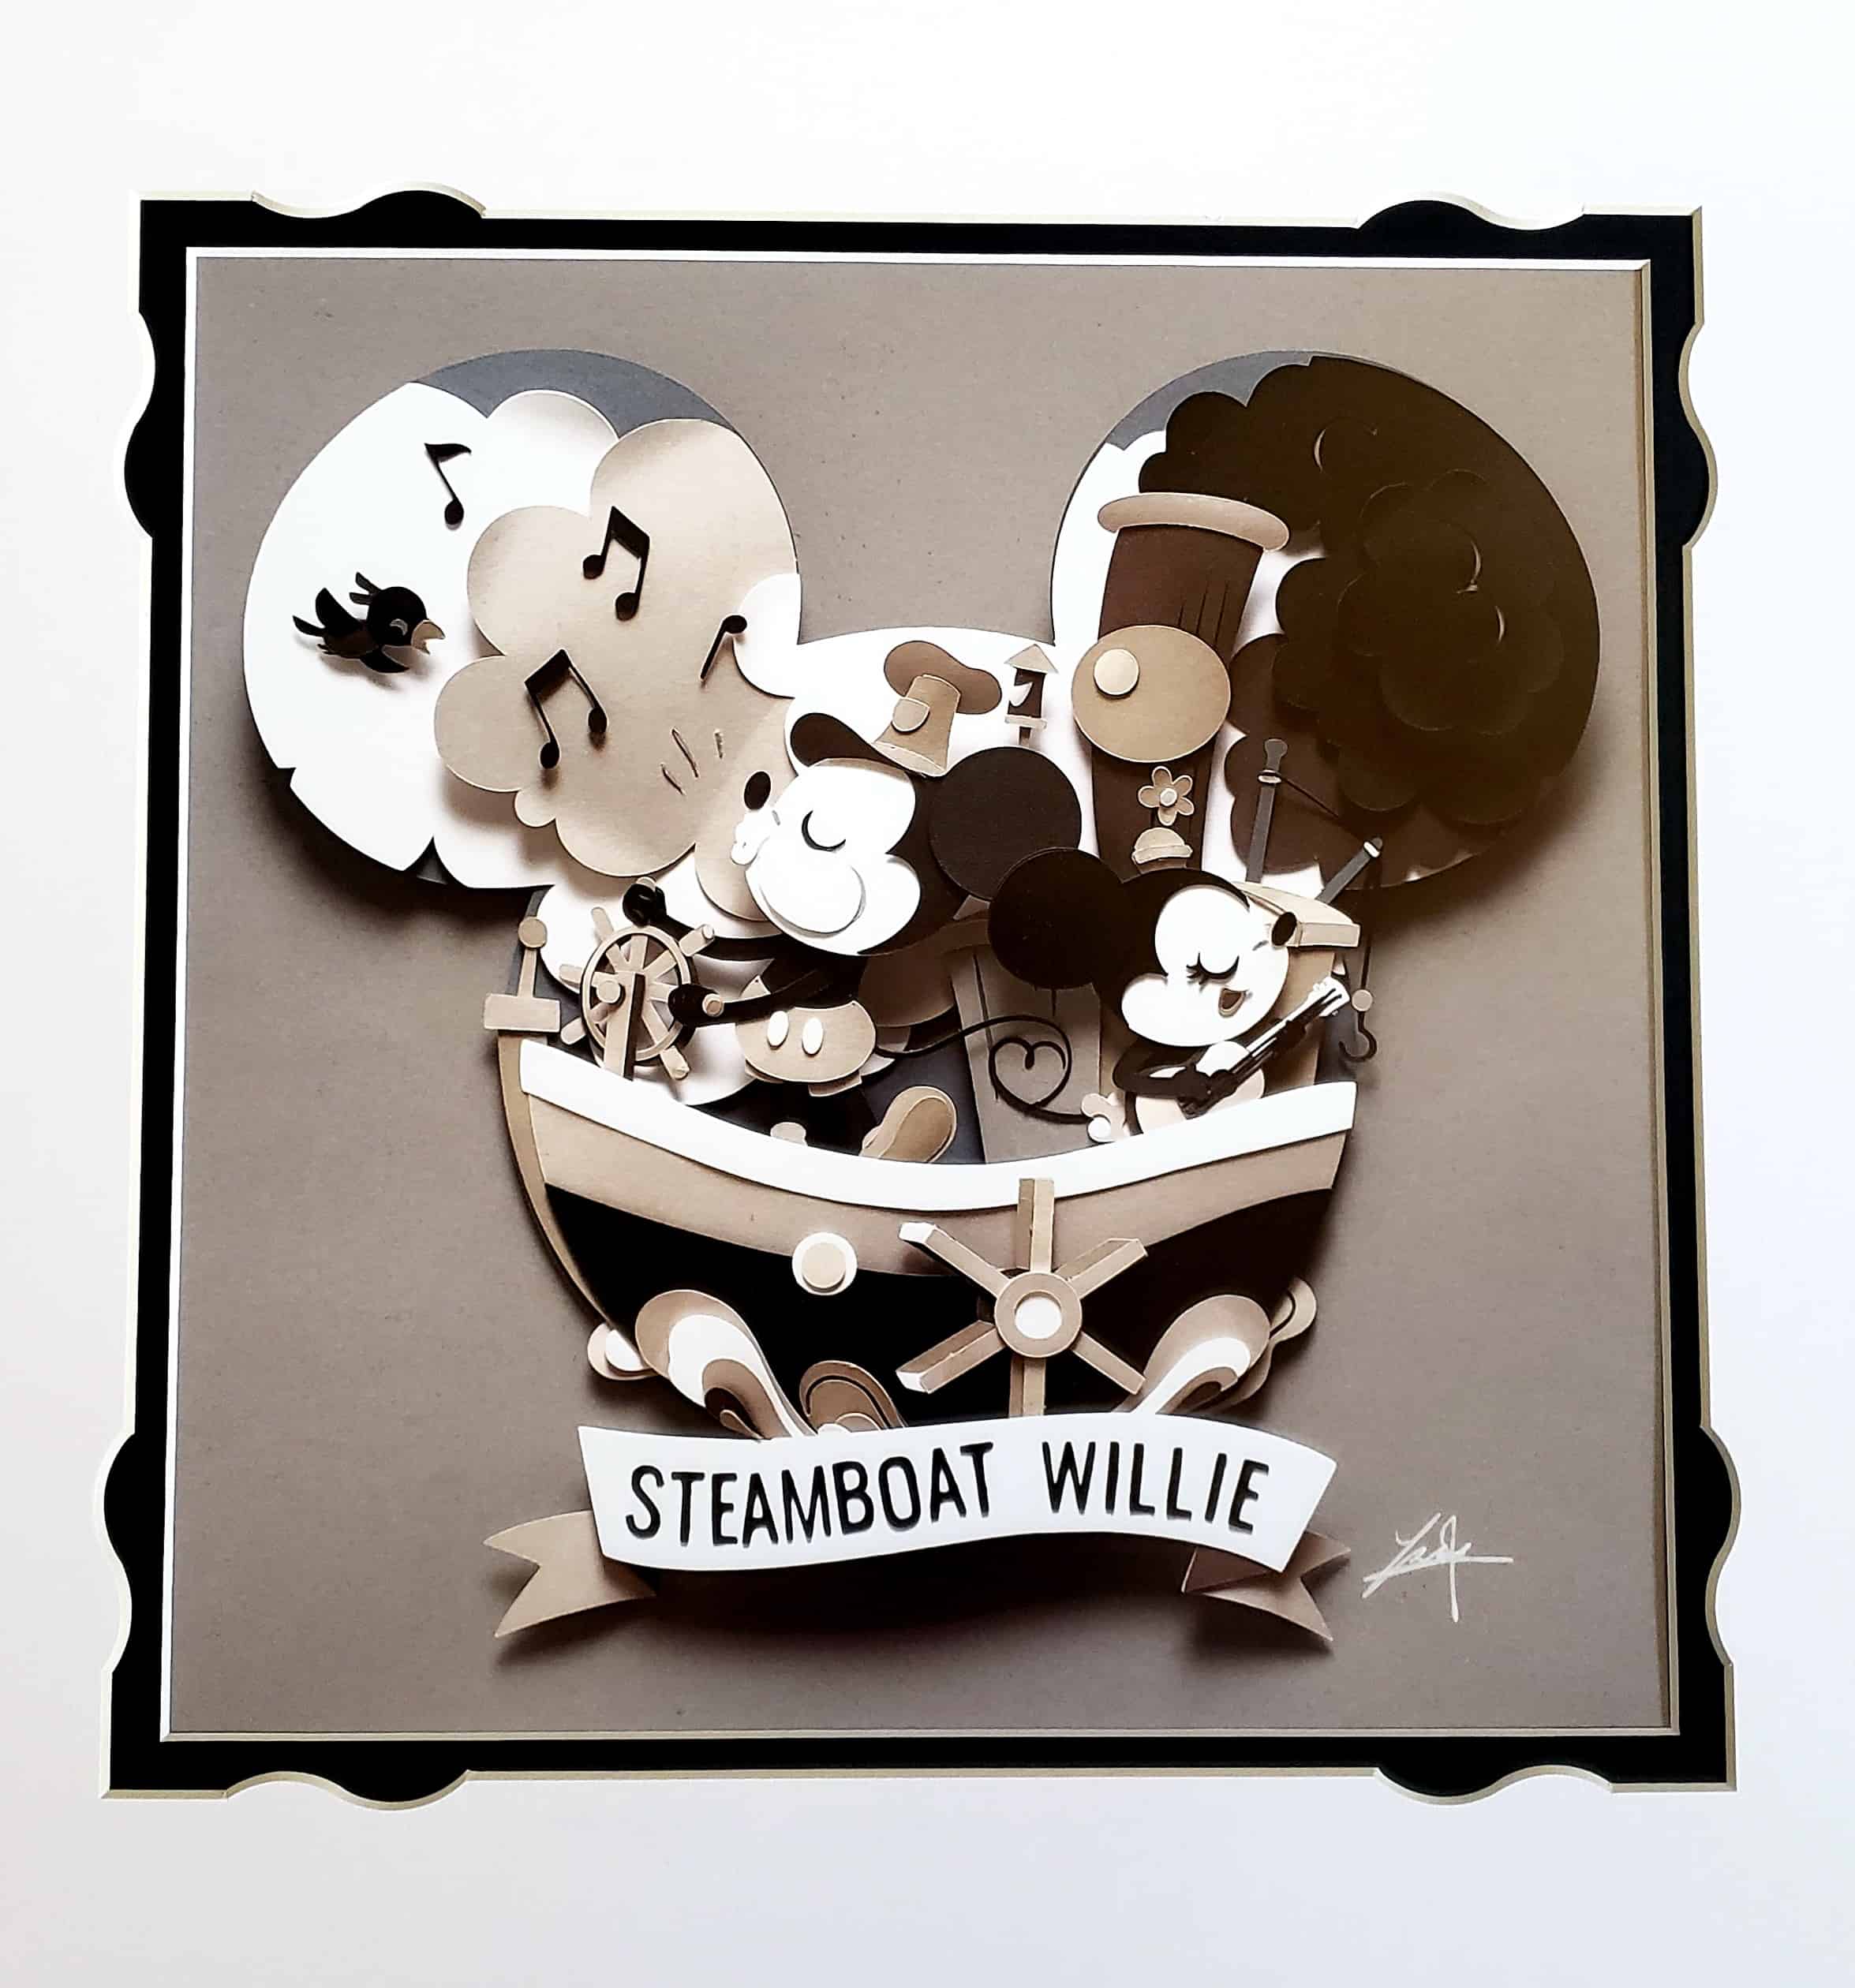 Epcot International Festival of the Arts Steamboat Willie